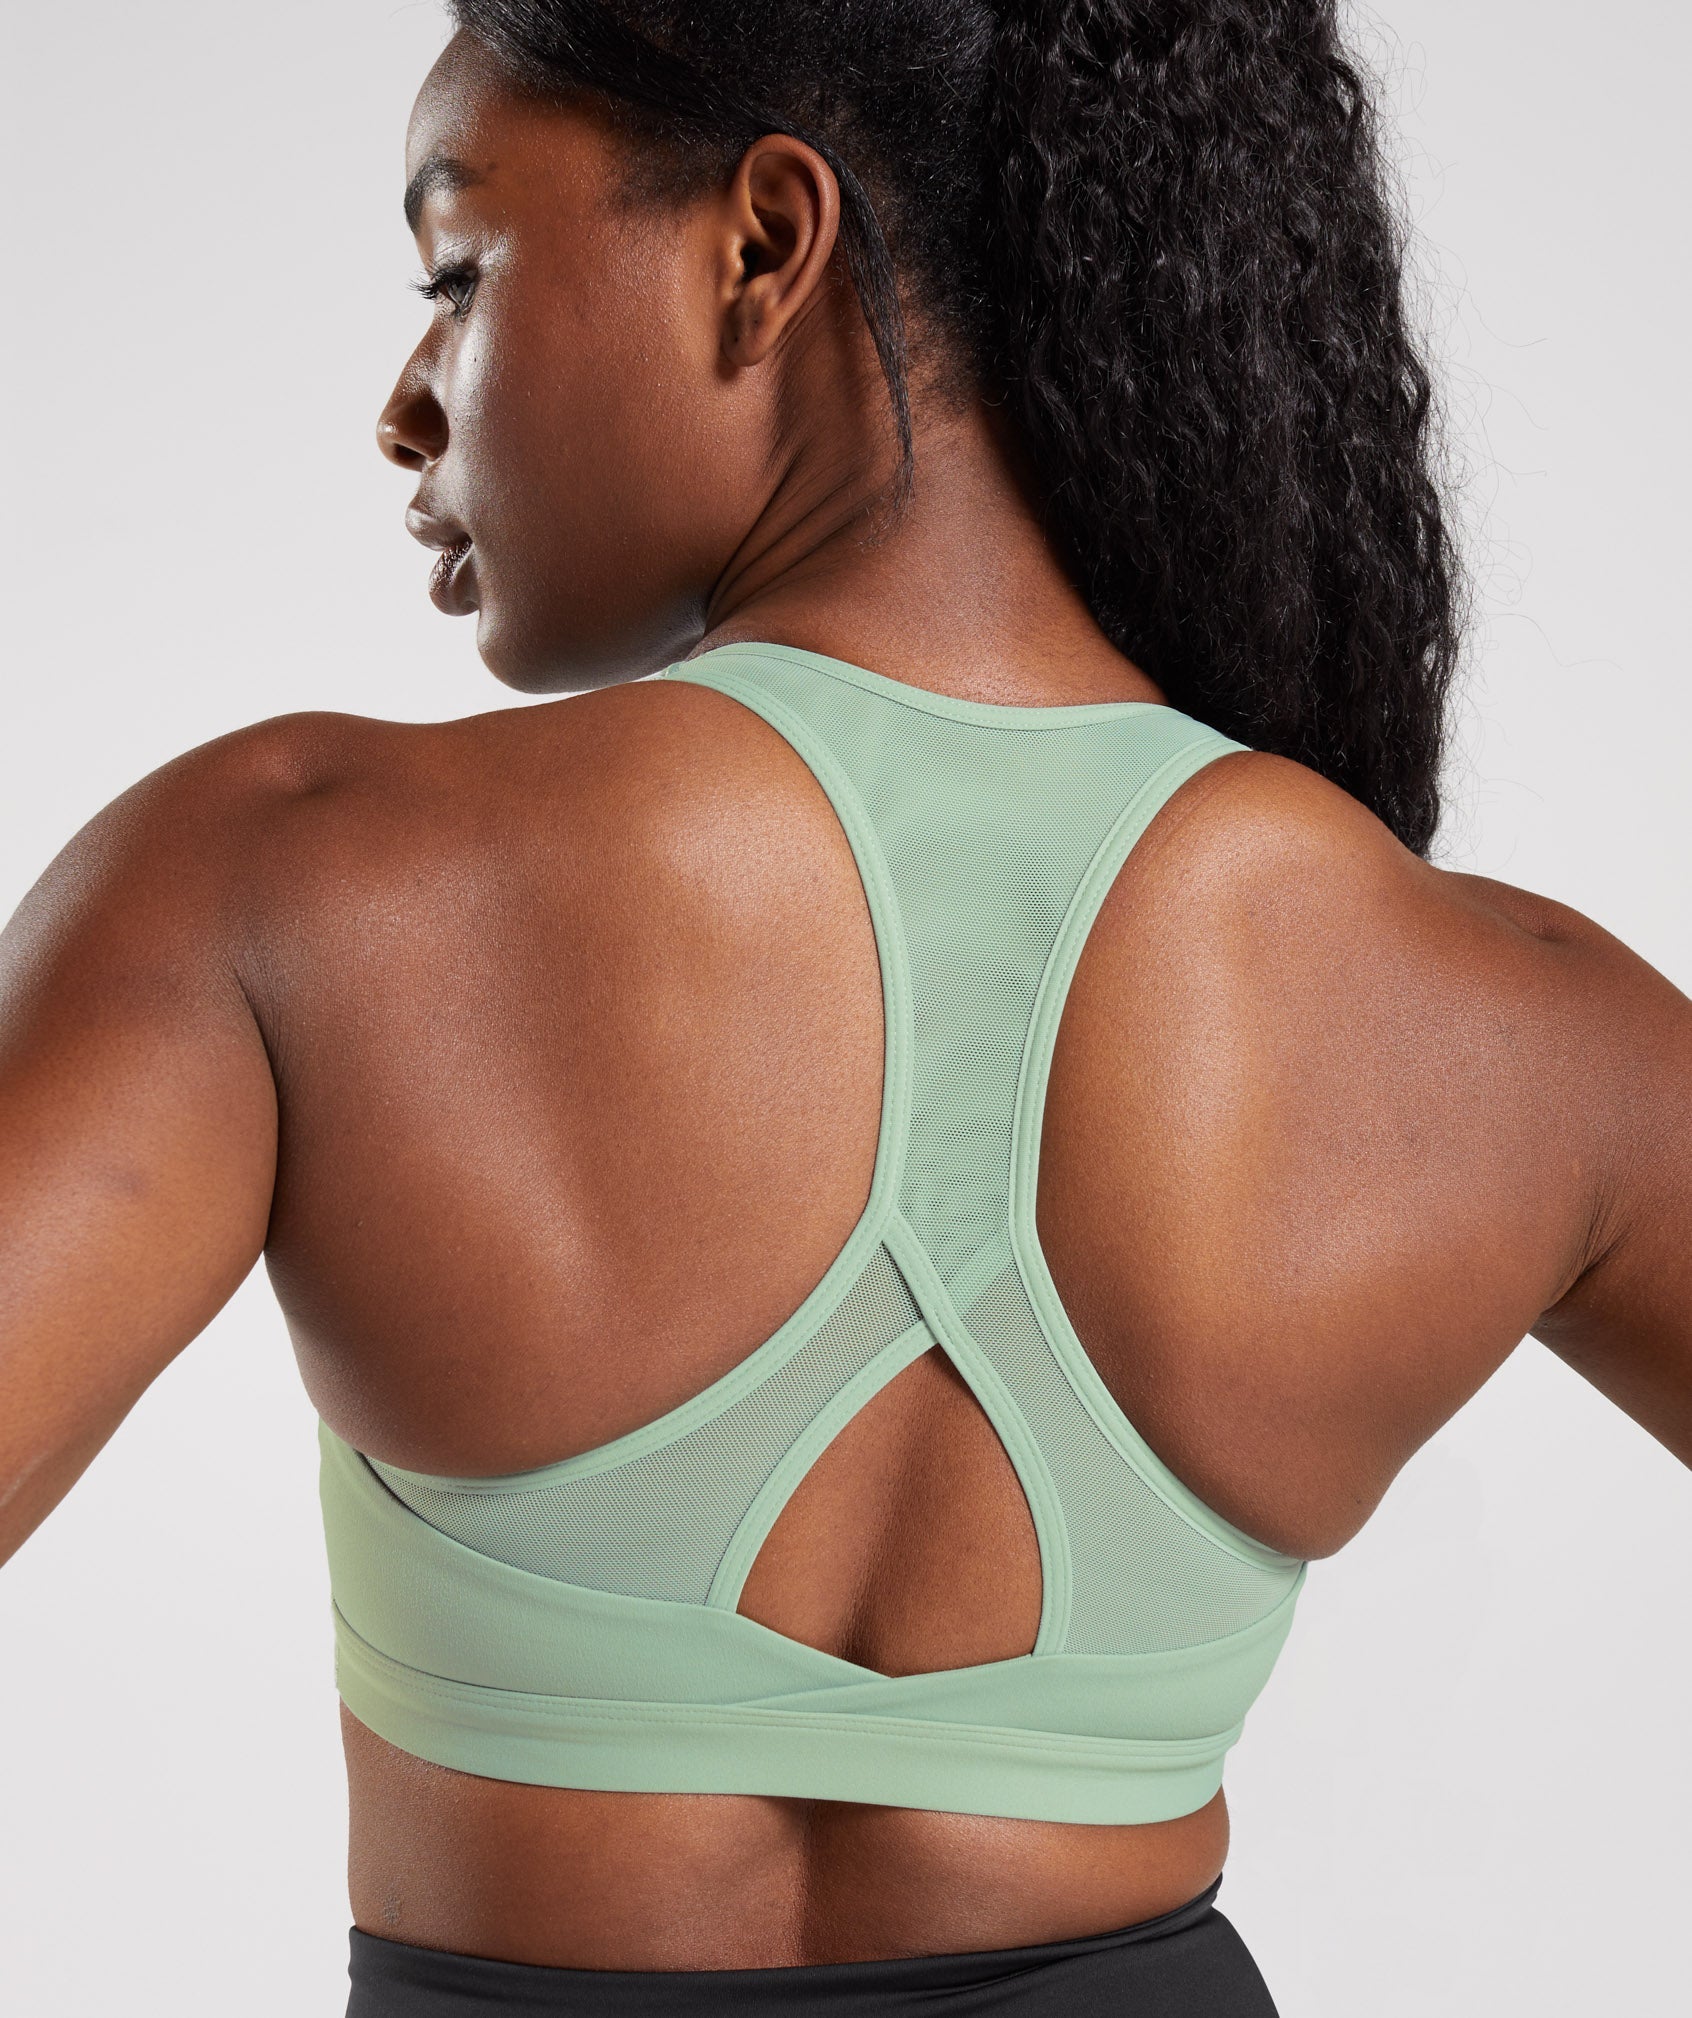 Gymshark Legacy Sports Bra Green Size XS - $40 New With Tags - From Sun